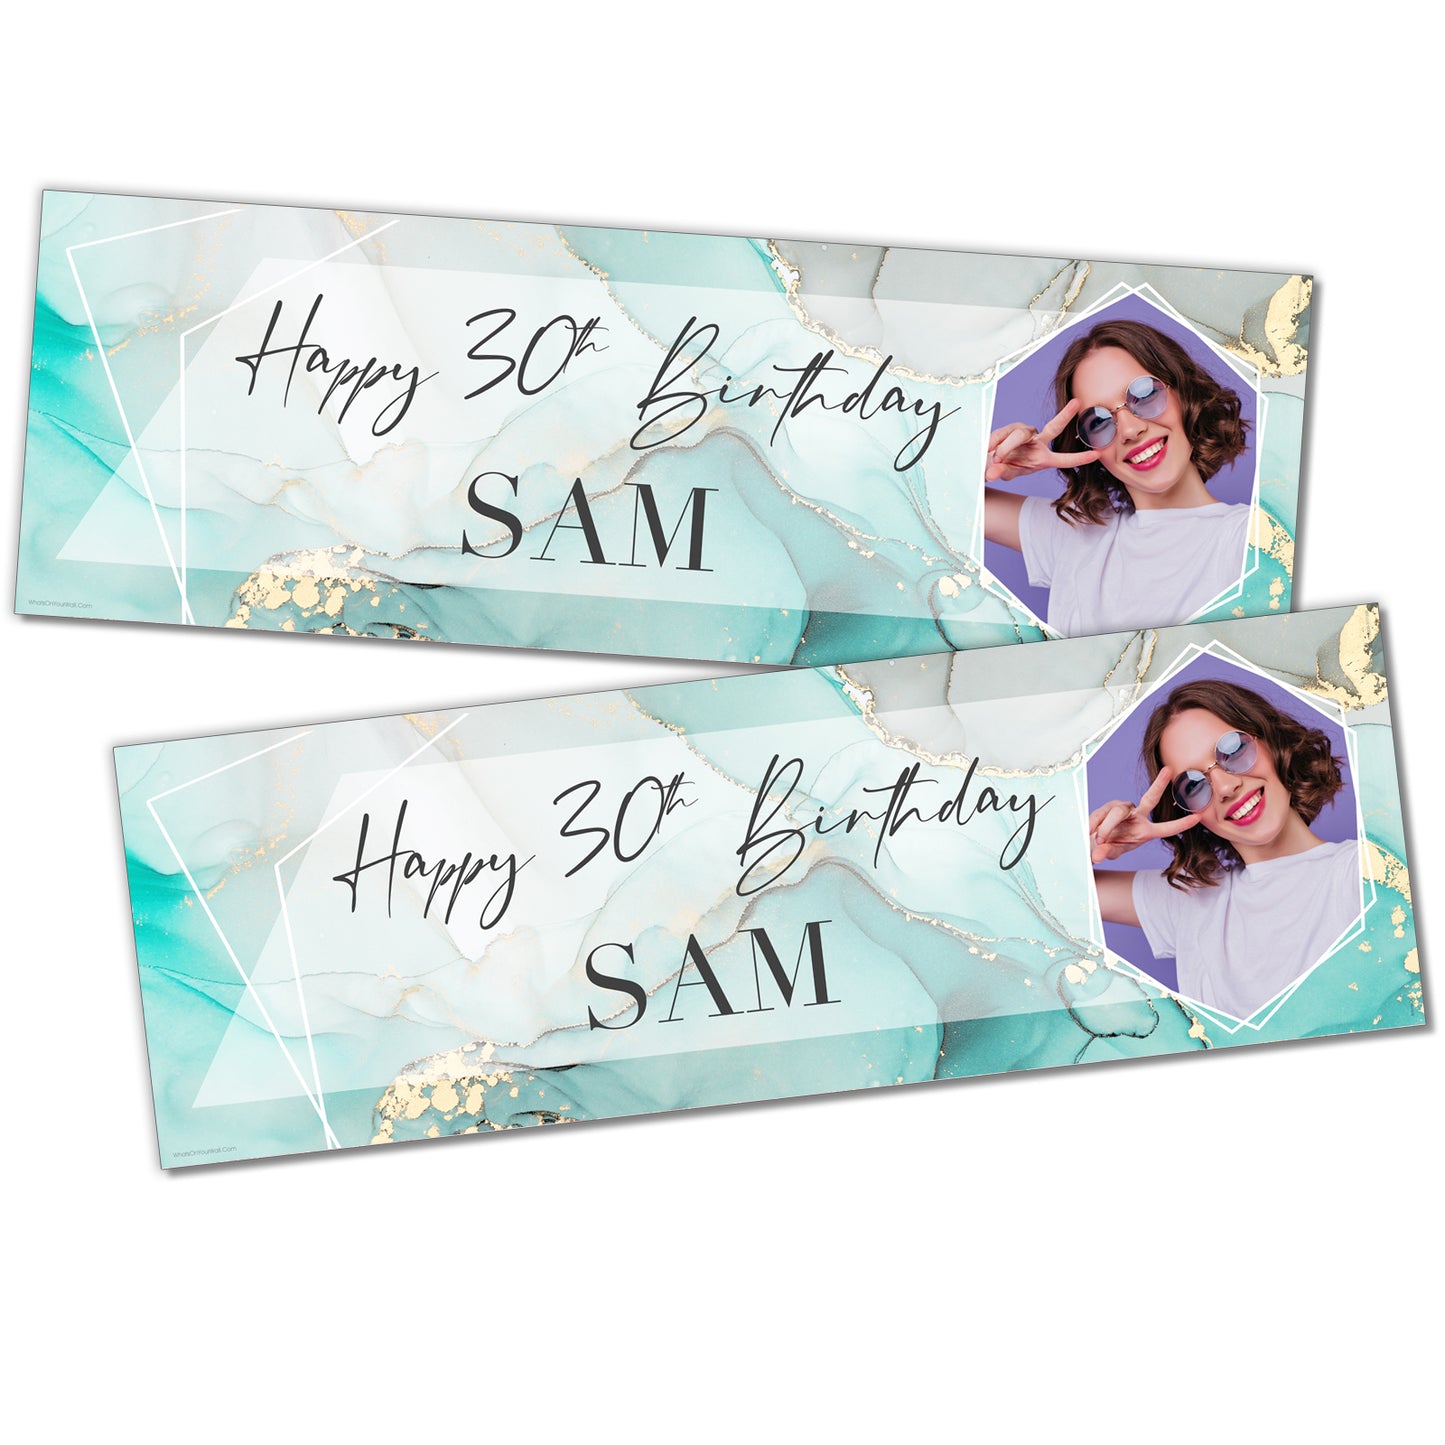 personalized birthday banner